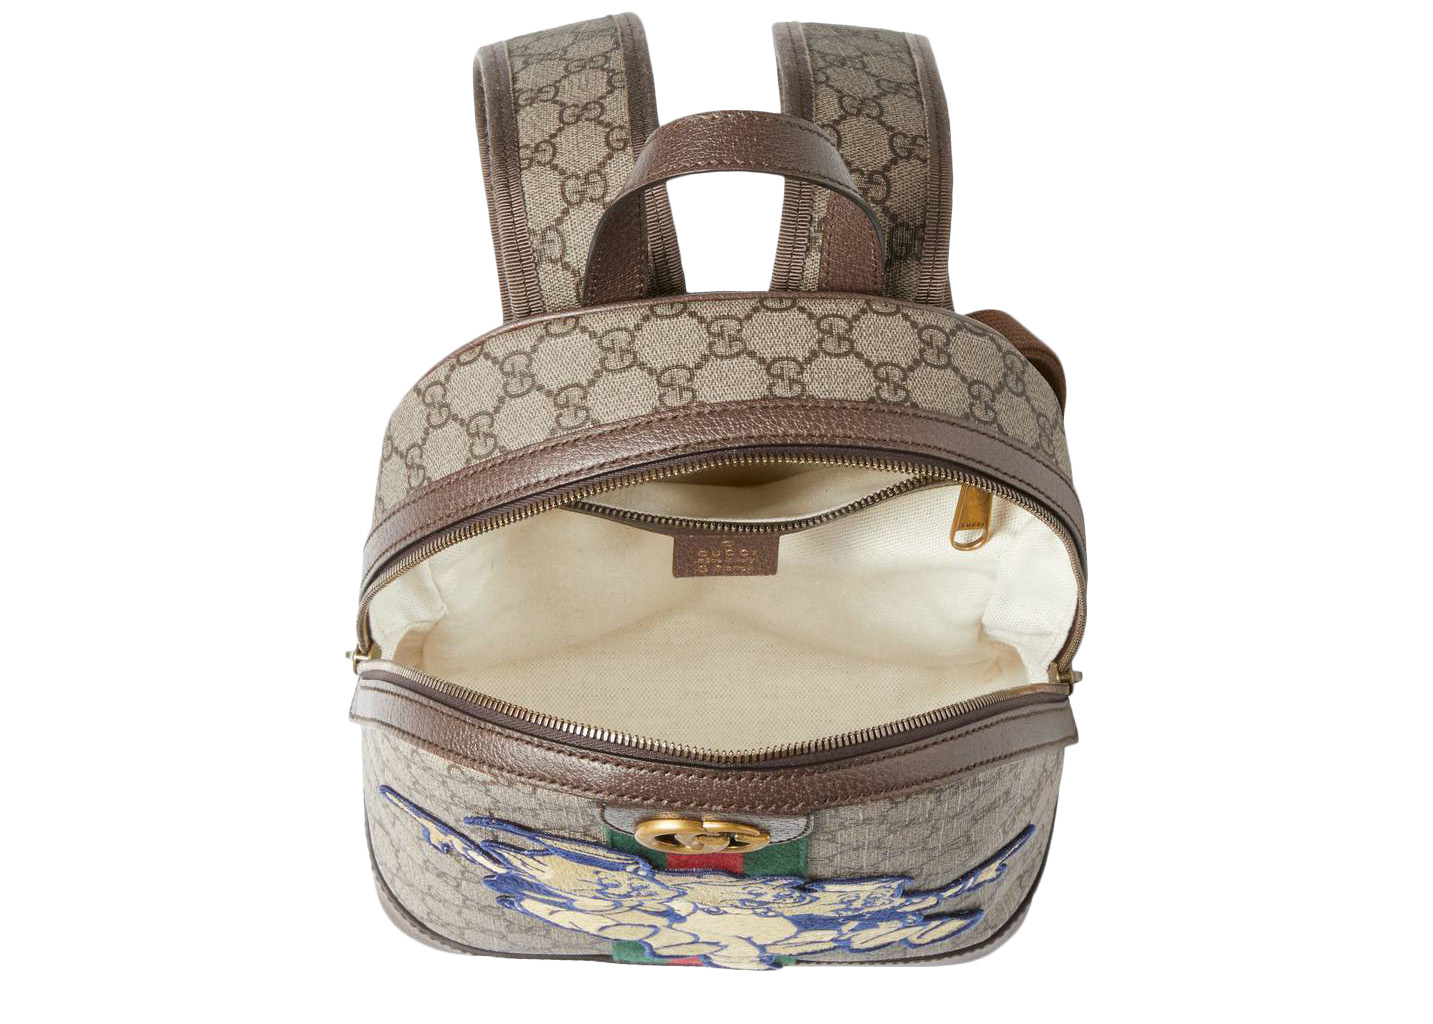 three little pigs gucci backpack